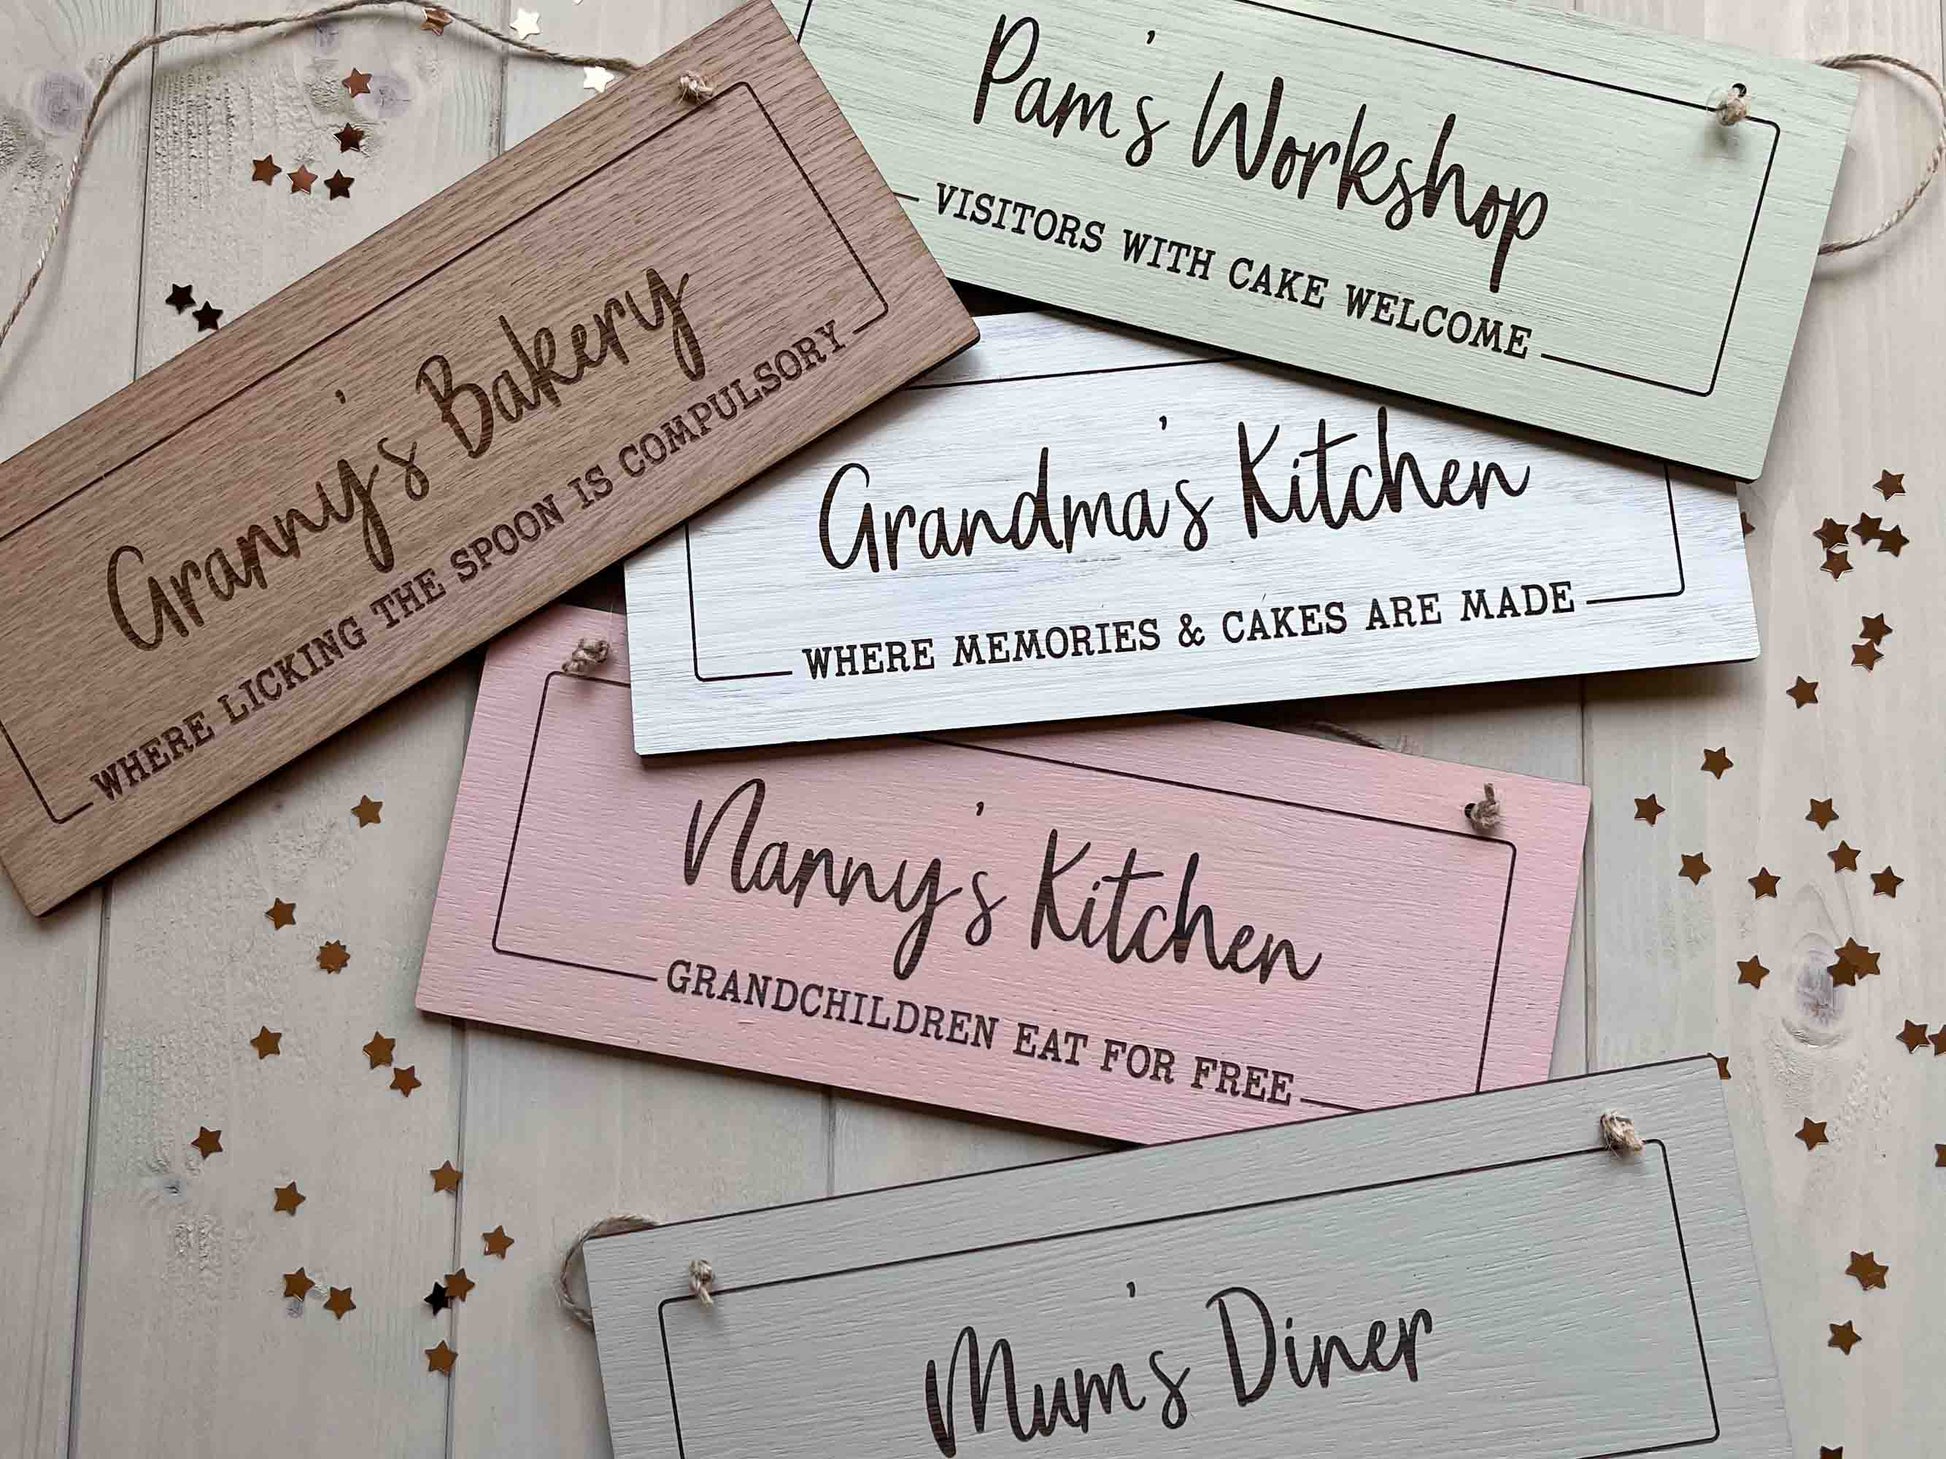 Personalised Wooden Sign - A unique addition to any kitchen, craft room, workshop or reading nook"